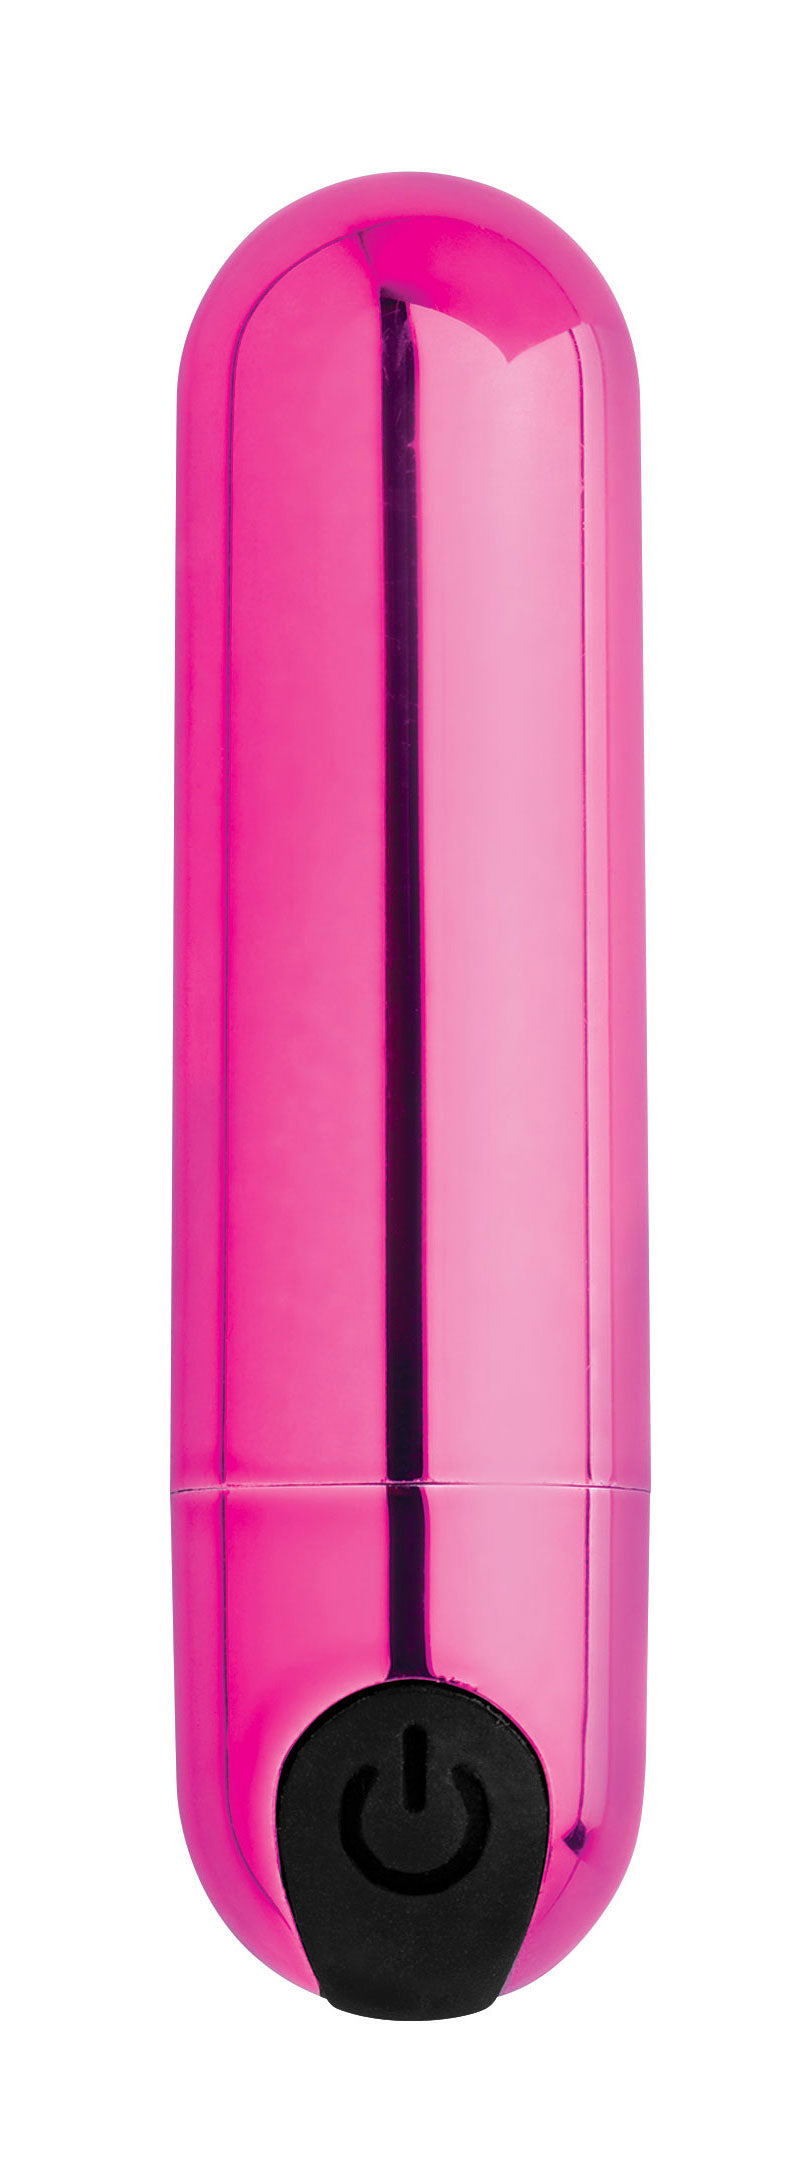 10x Rechargeable Vibrating Metallic Bullet - Pink BNG-AG656-PNK